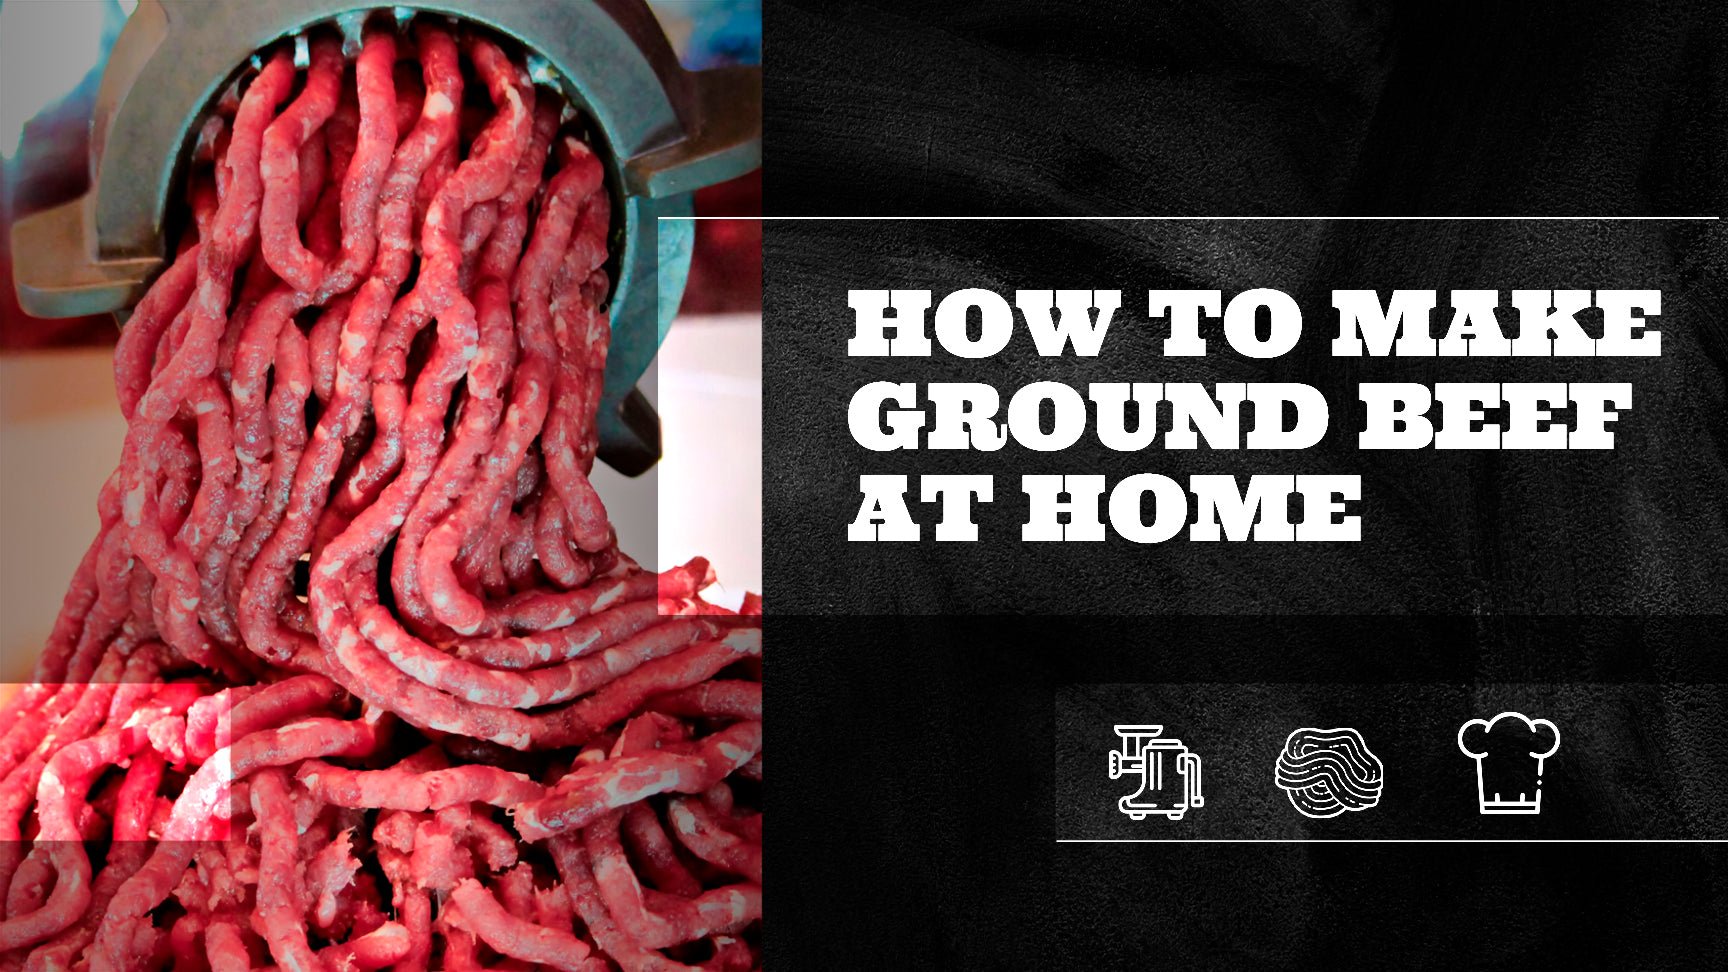 How to Grind Your Own Meat Without a Meat Grinder